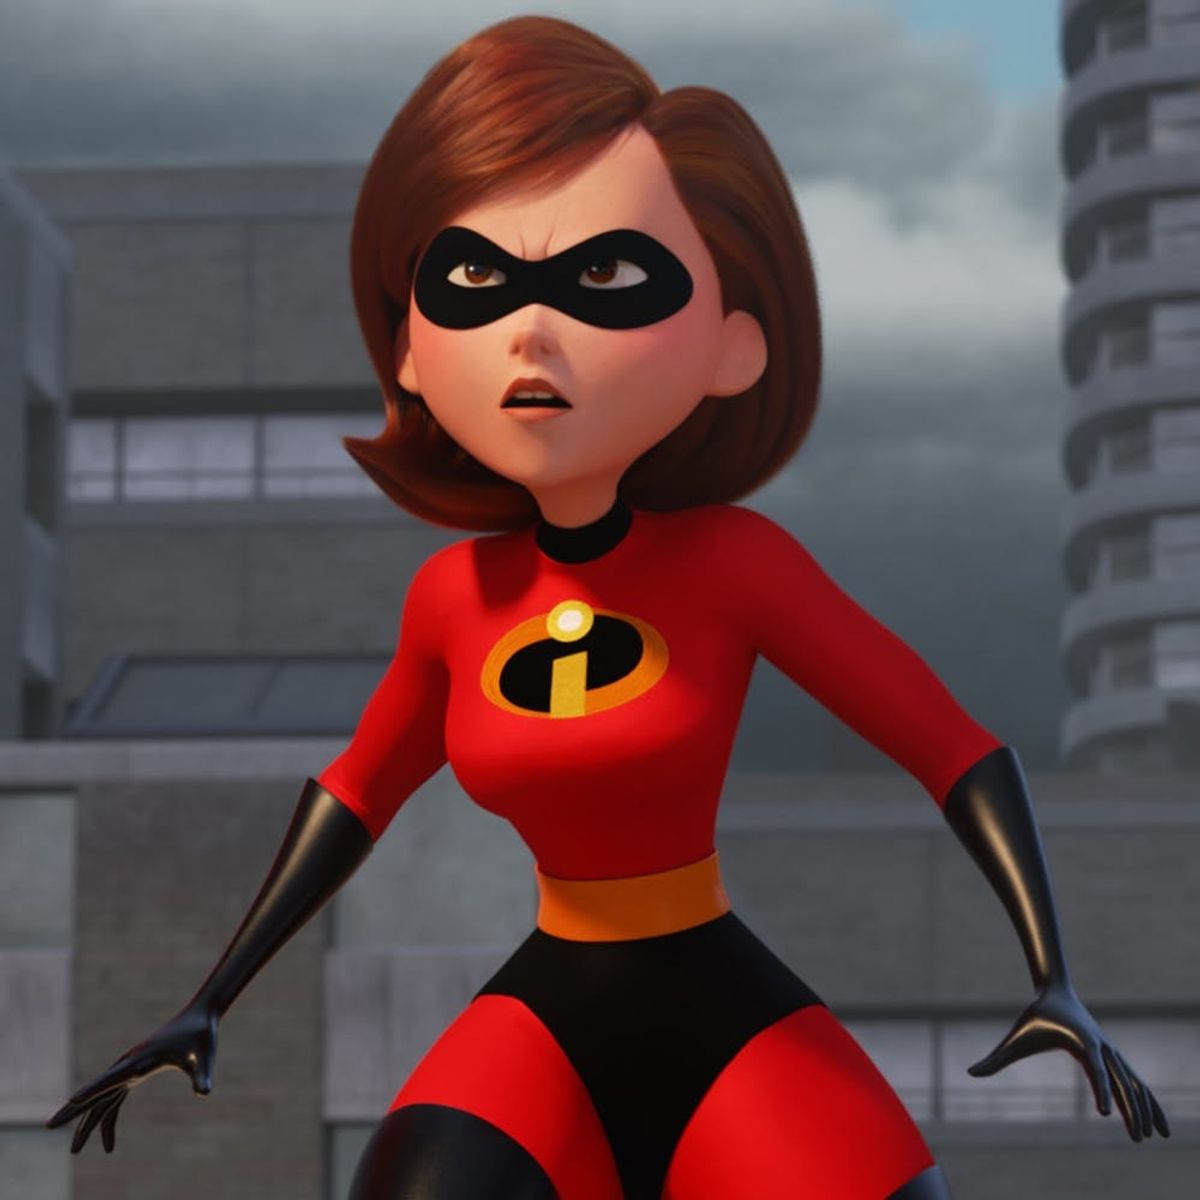 The New ‘Incredibles 2’ Trailer Shows Elastigirl’s Heroic Ambitions and It Looks SO Good